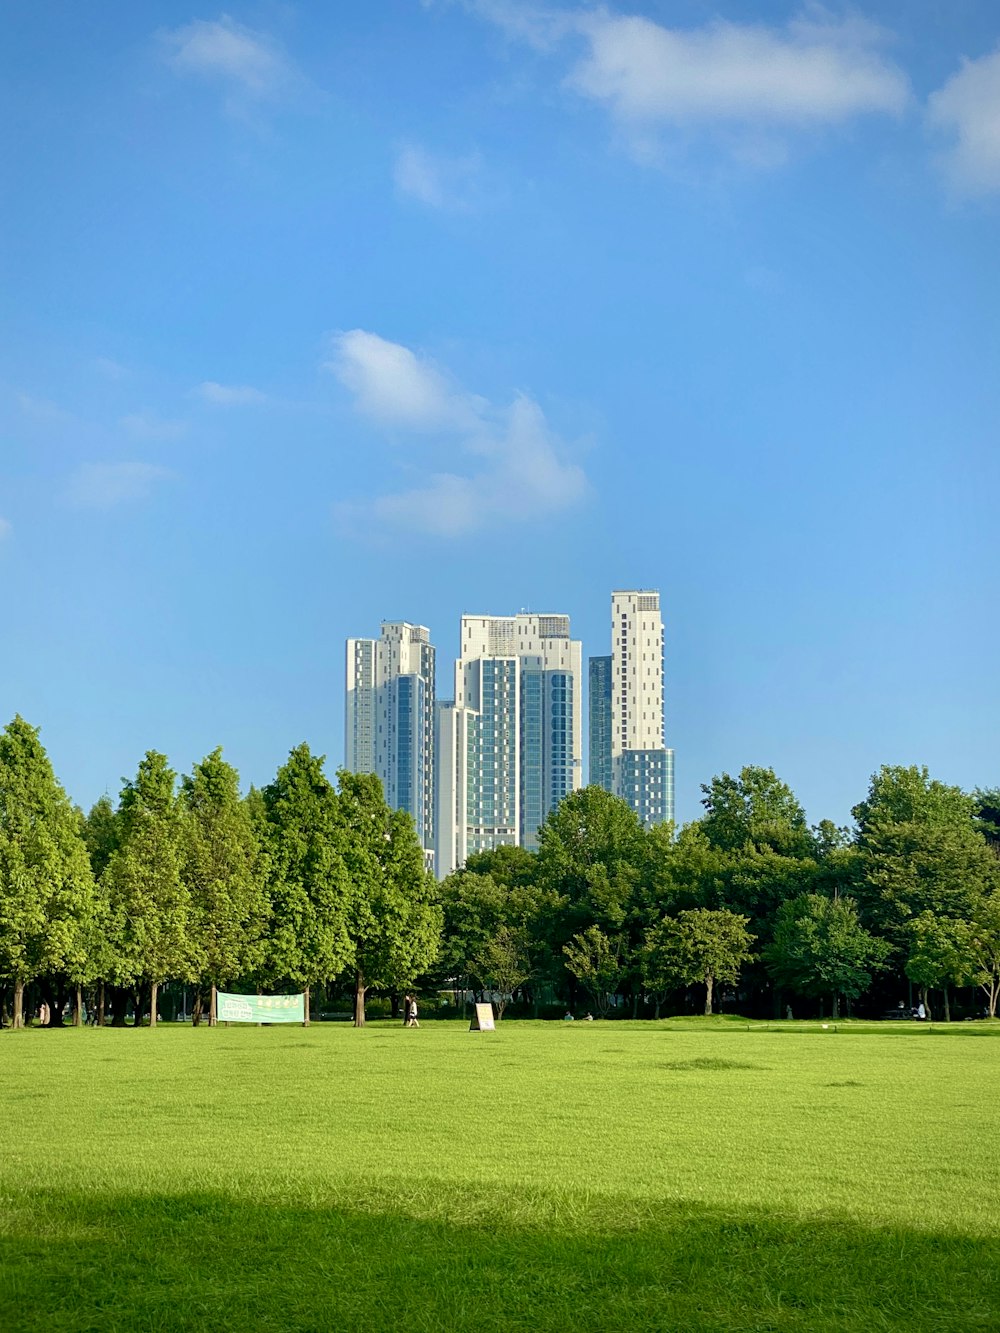 green grass field with trees and high rise buildings in distance